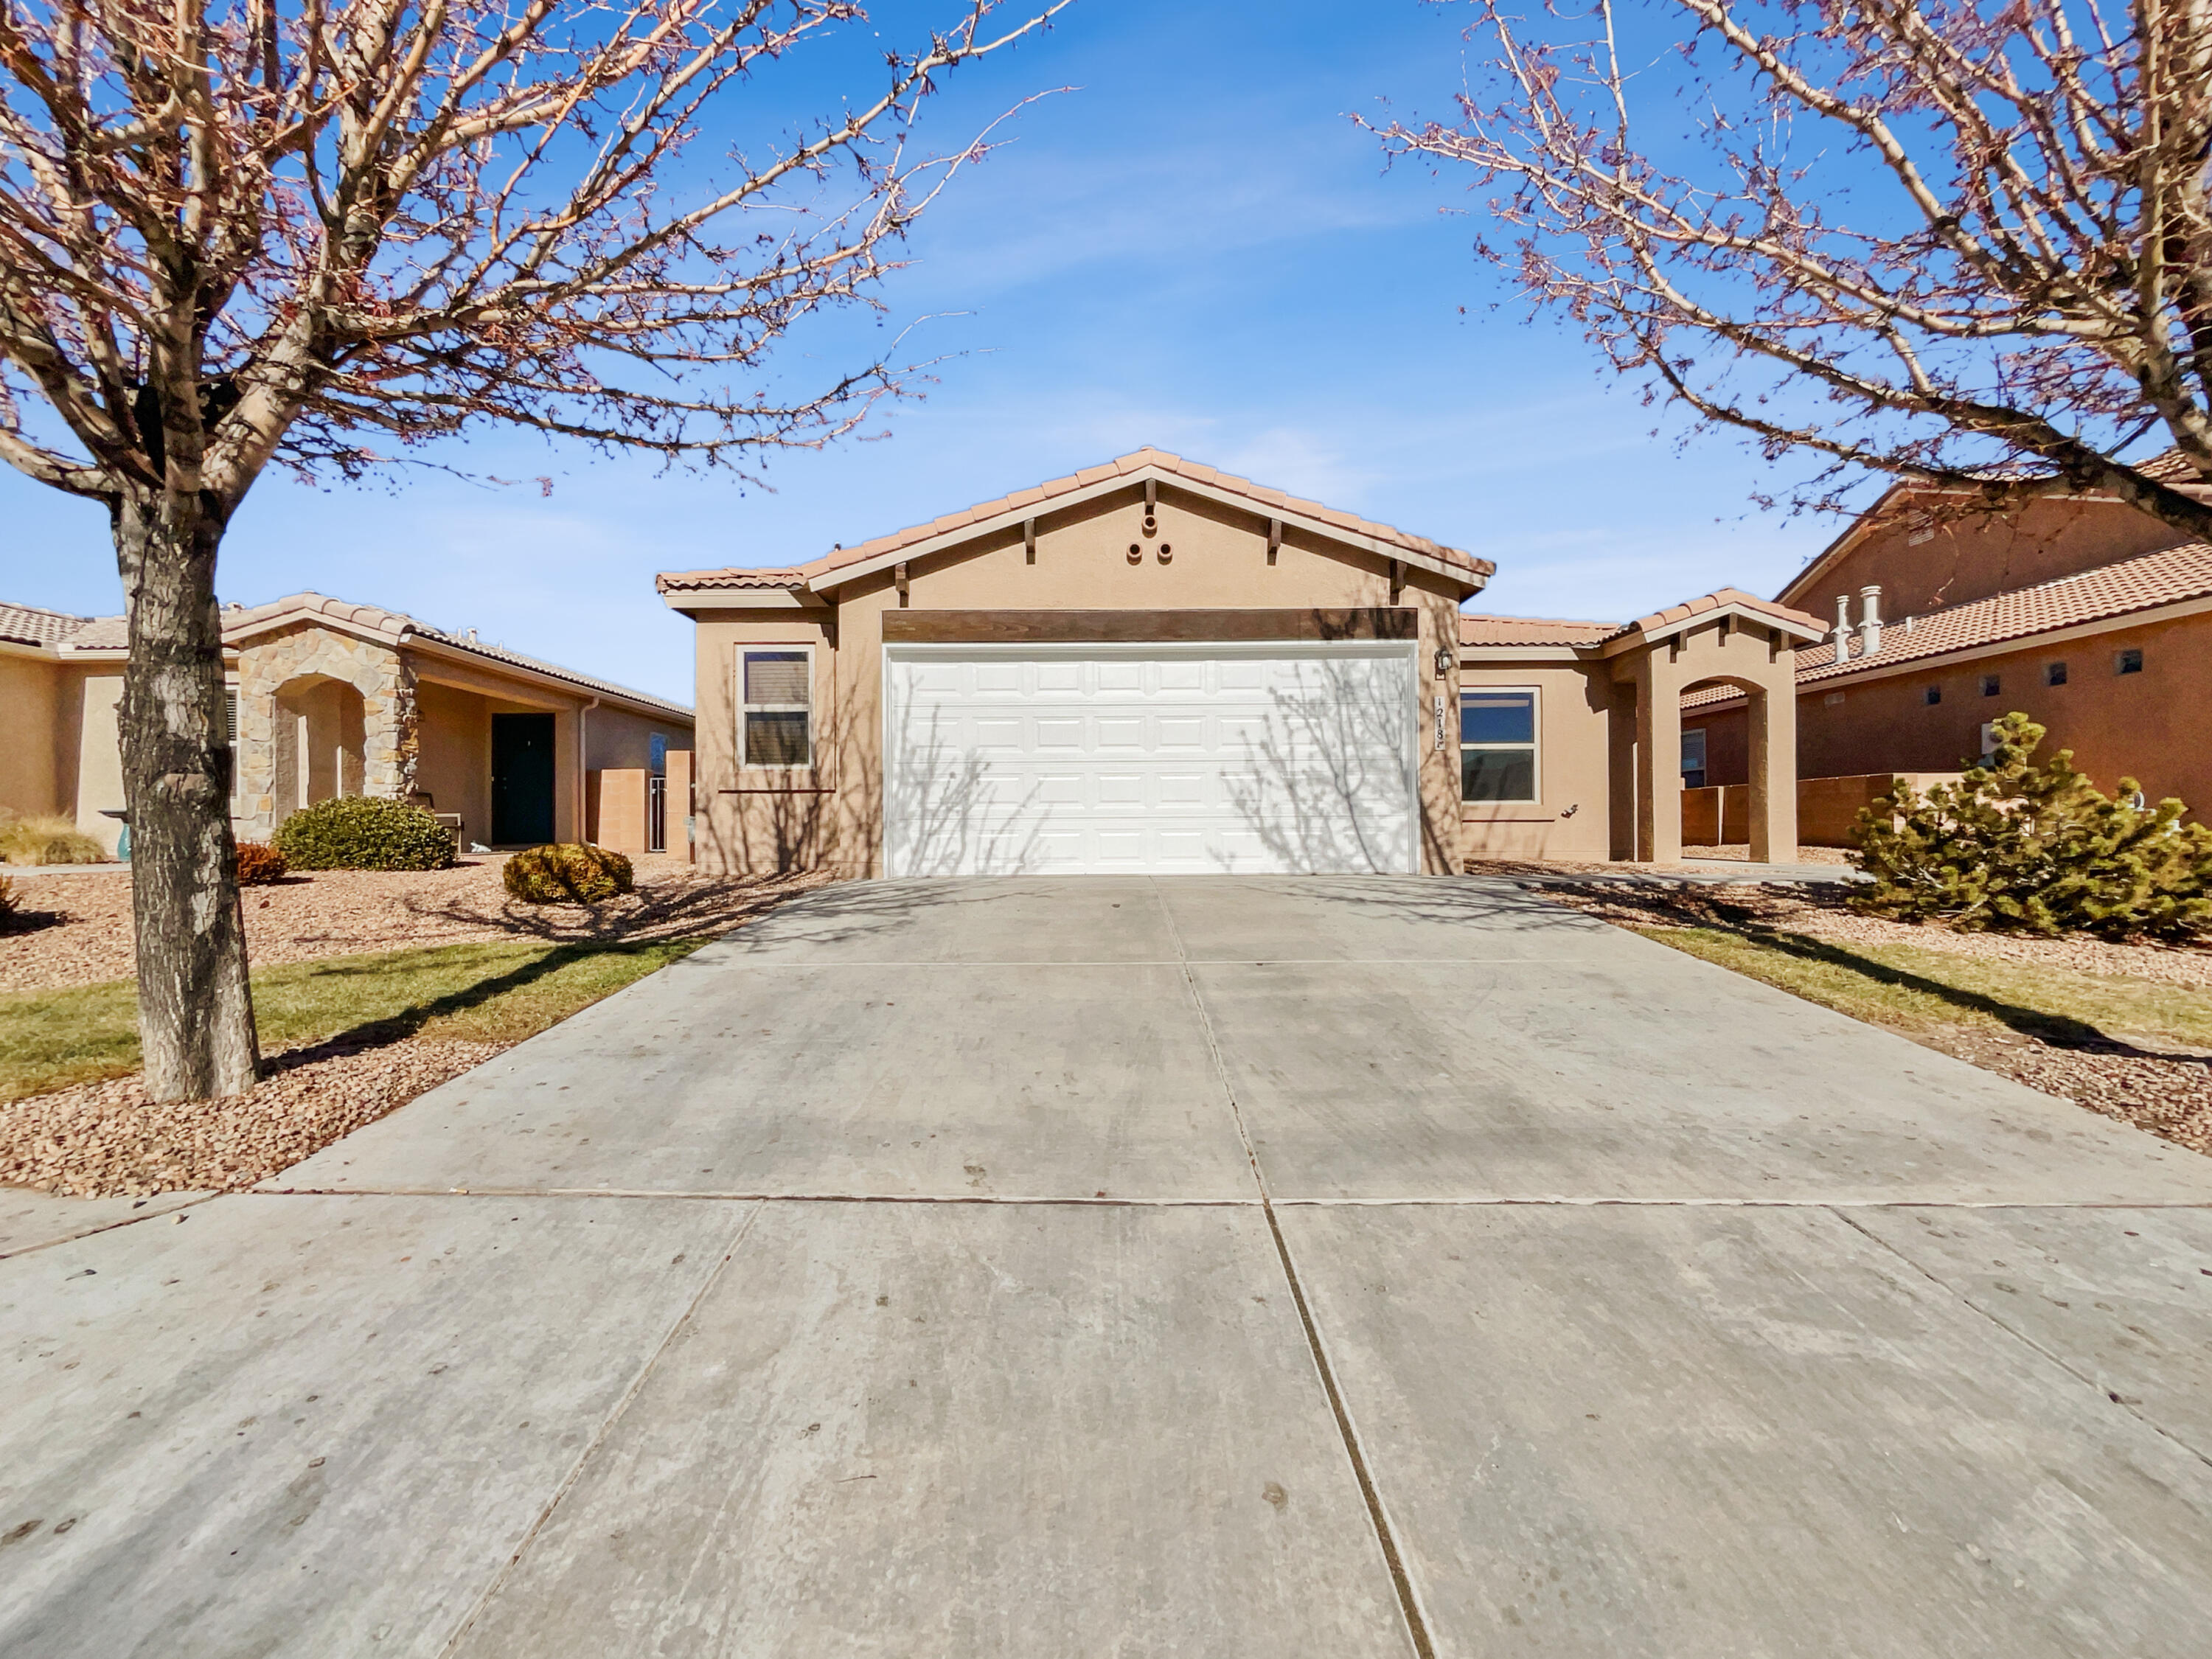 This Bernalillo one-story home offers a patio, granite countertops, and a two-car garage.